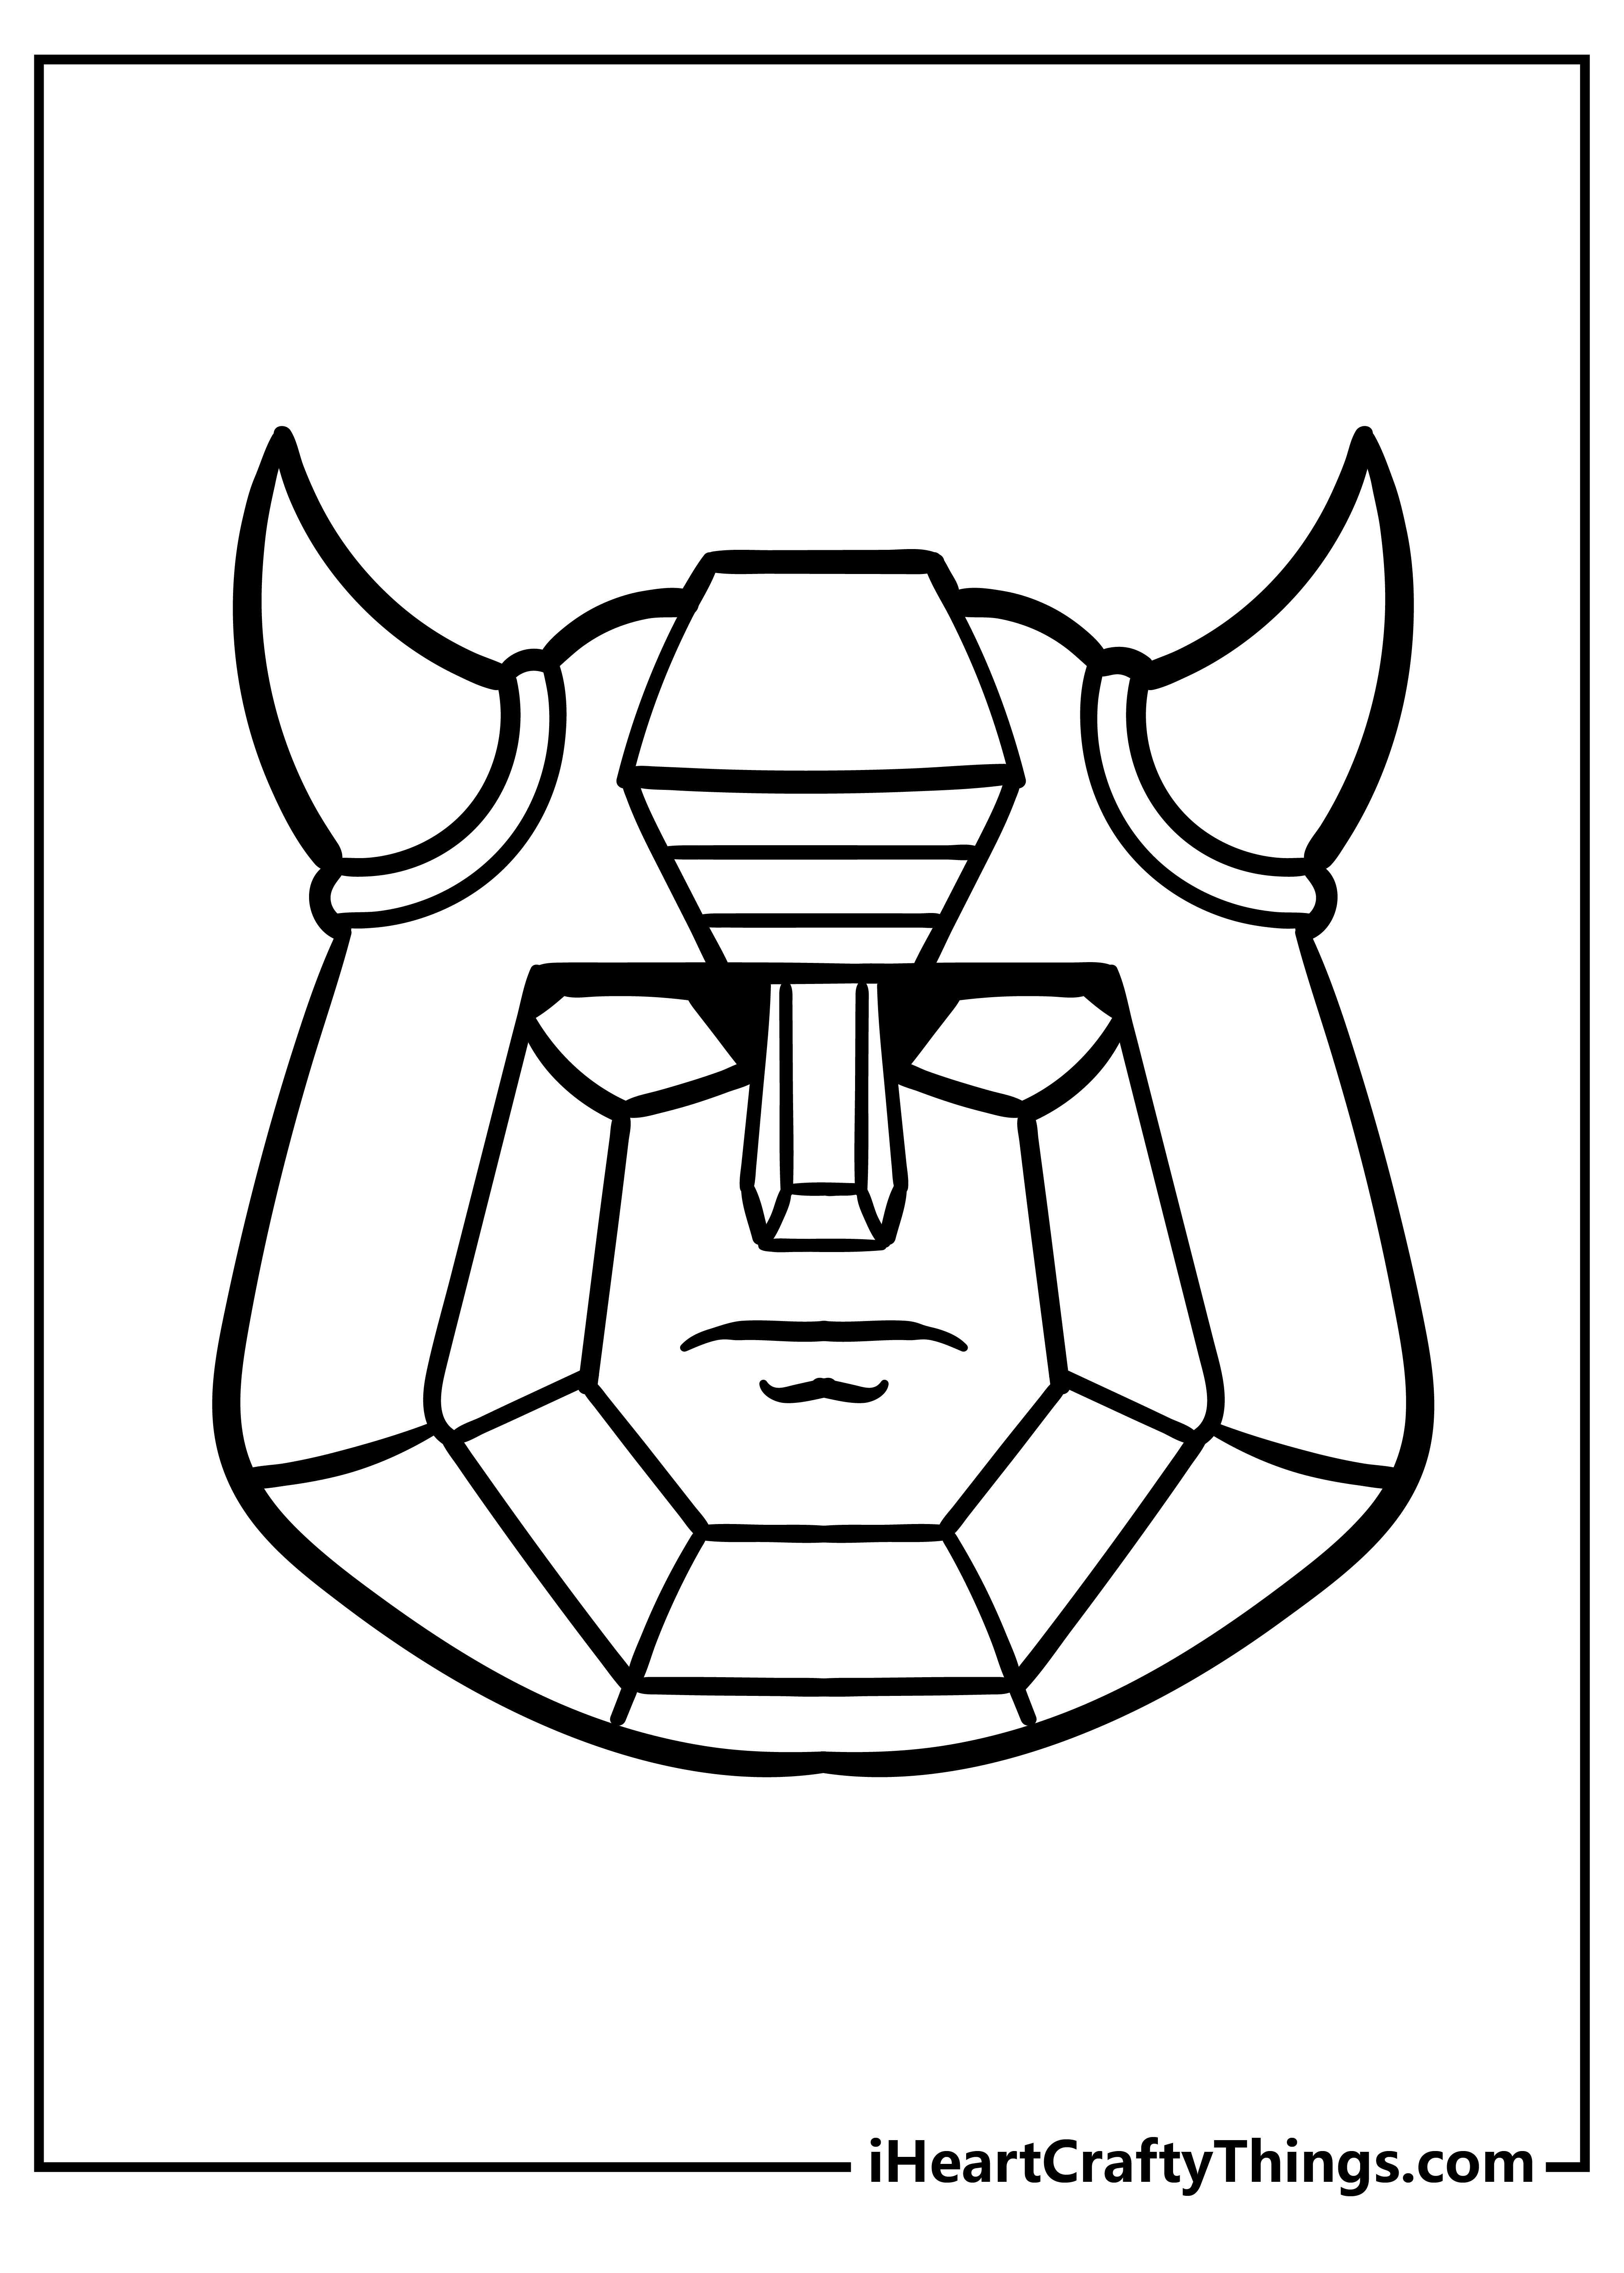 Bumblebee Coloring Pages for preschoolers free printable